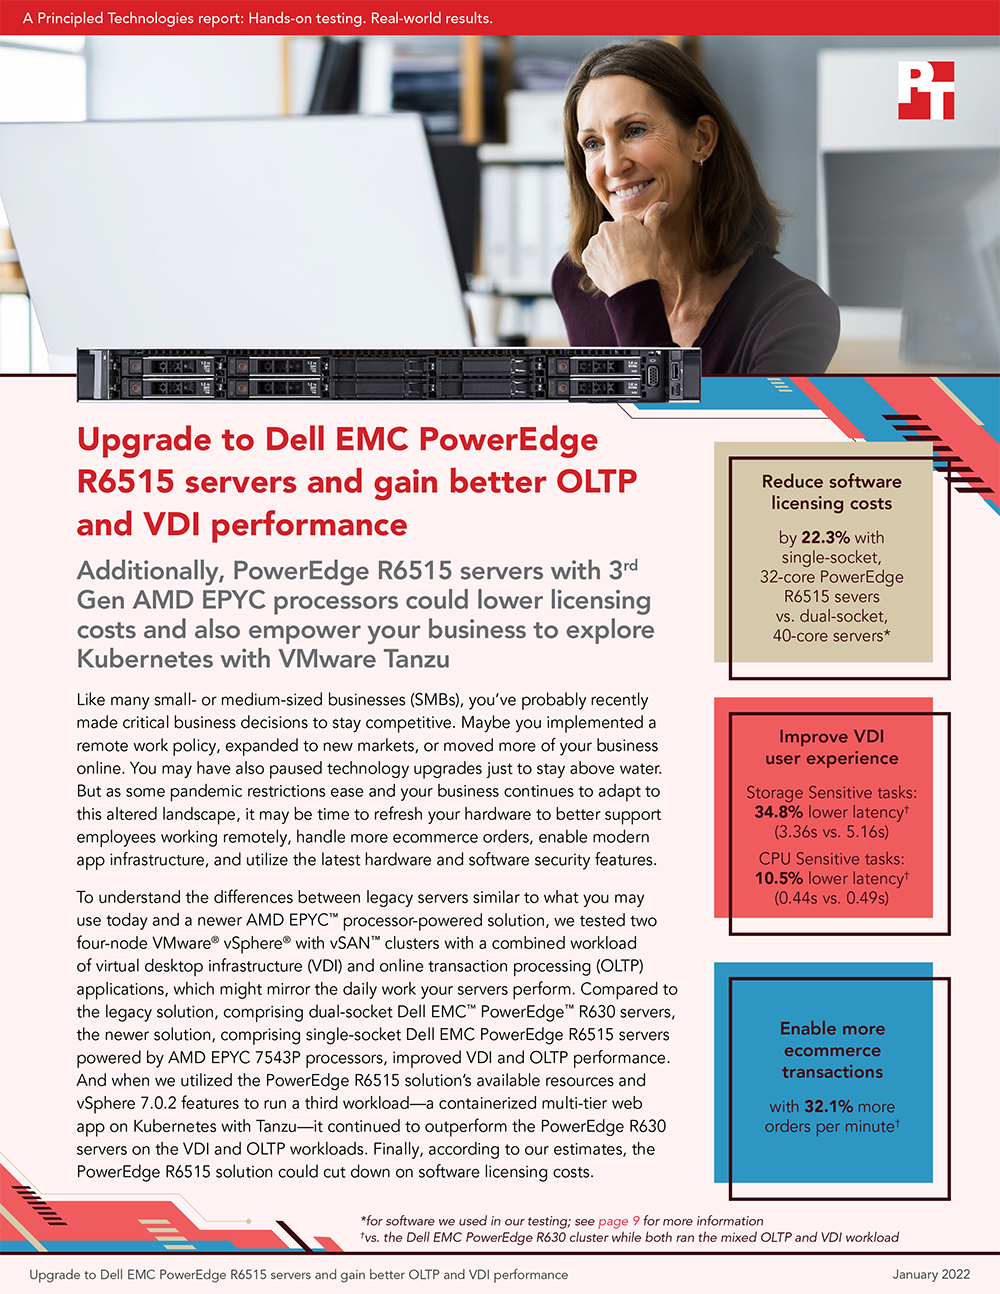  Upgrade to Dell EMC PowerEdge R6515 servers and gain better OLTP and VDI performance